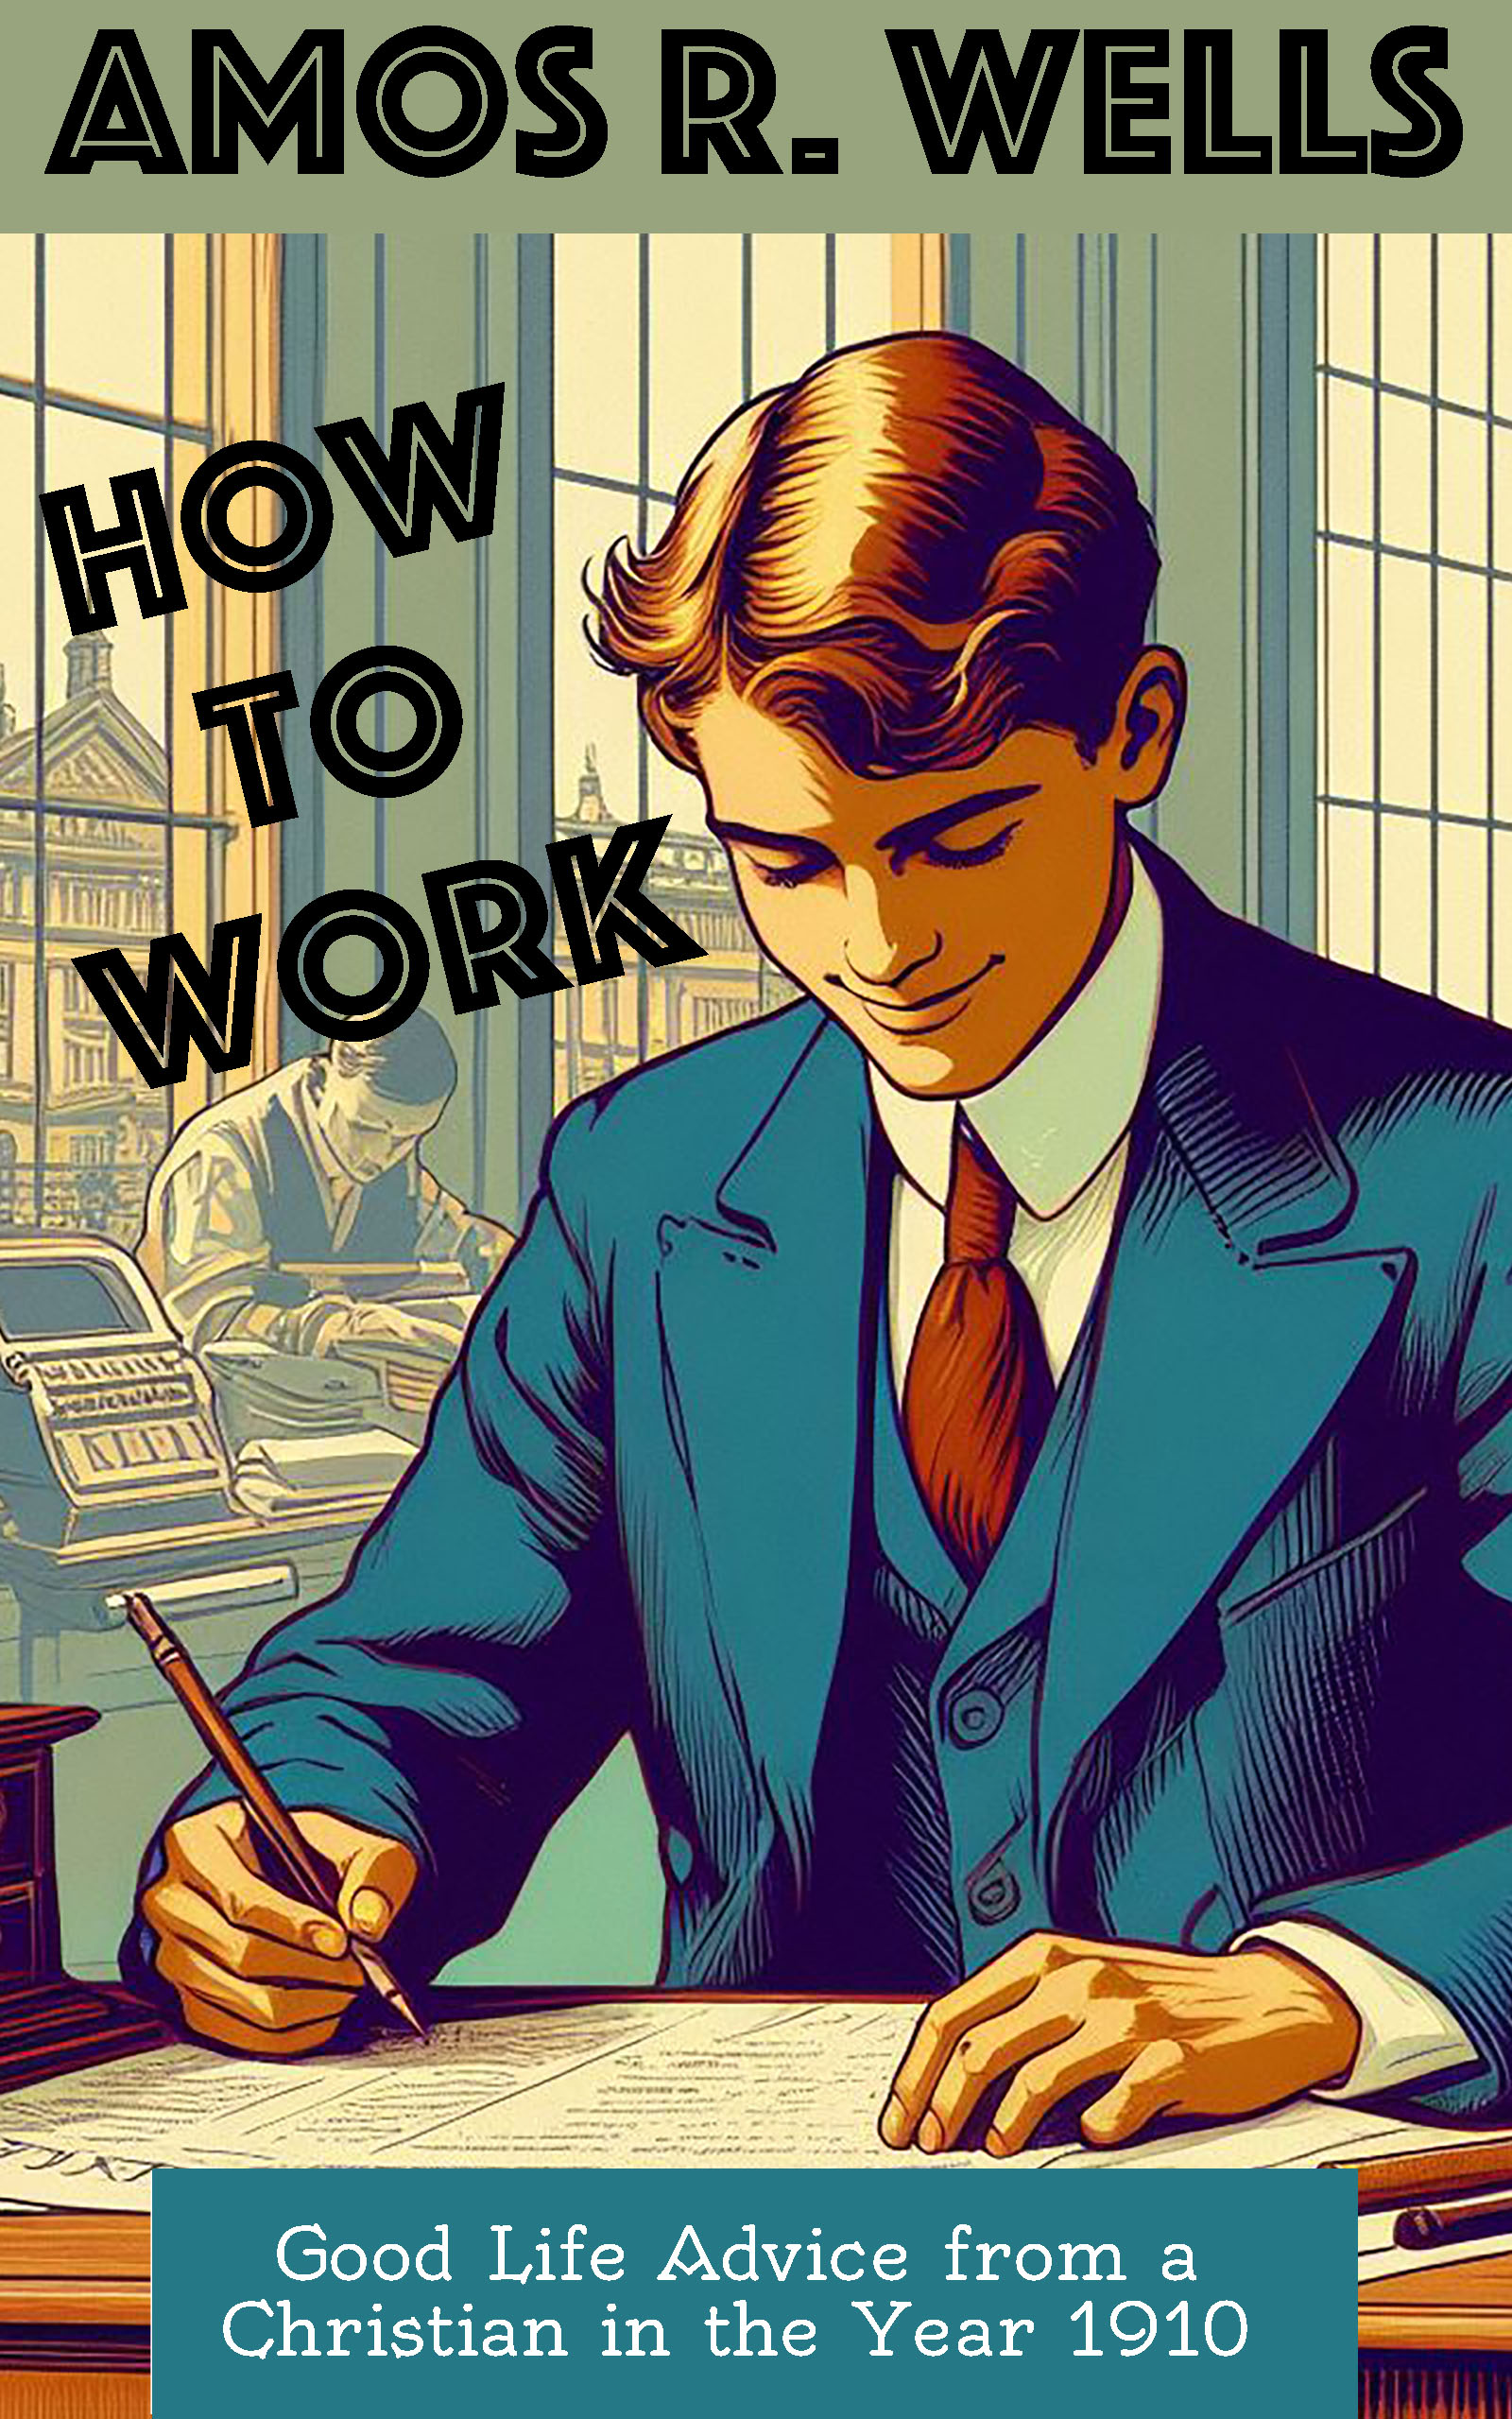 How to Work, by Amos R. Wells